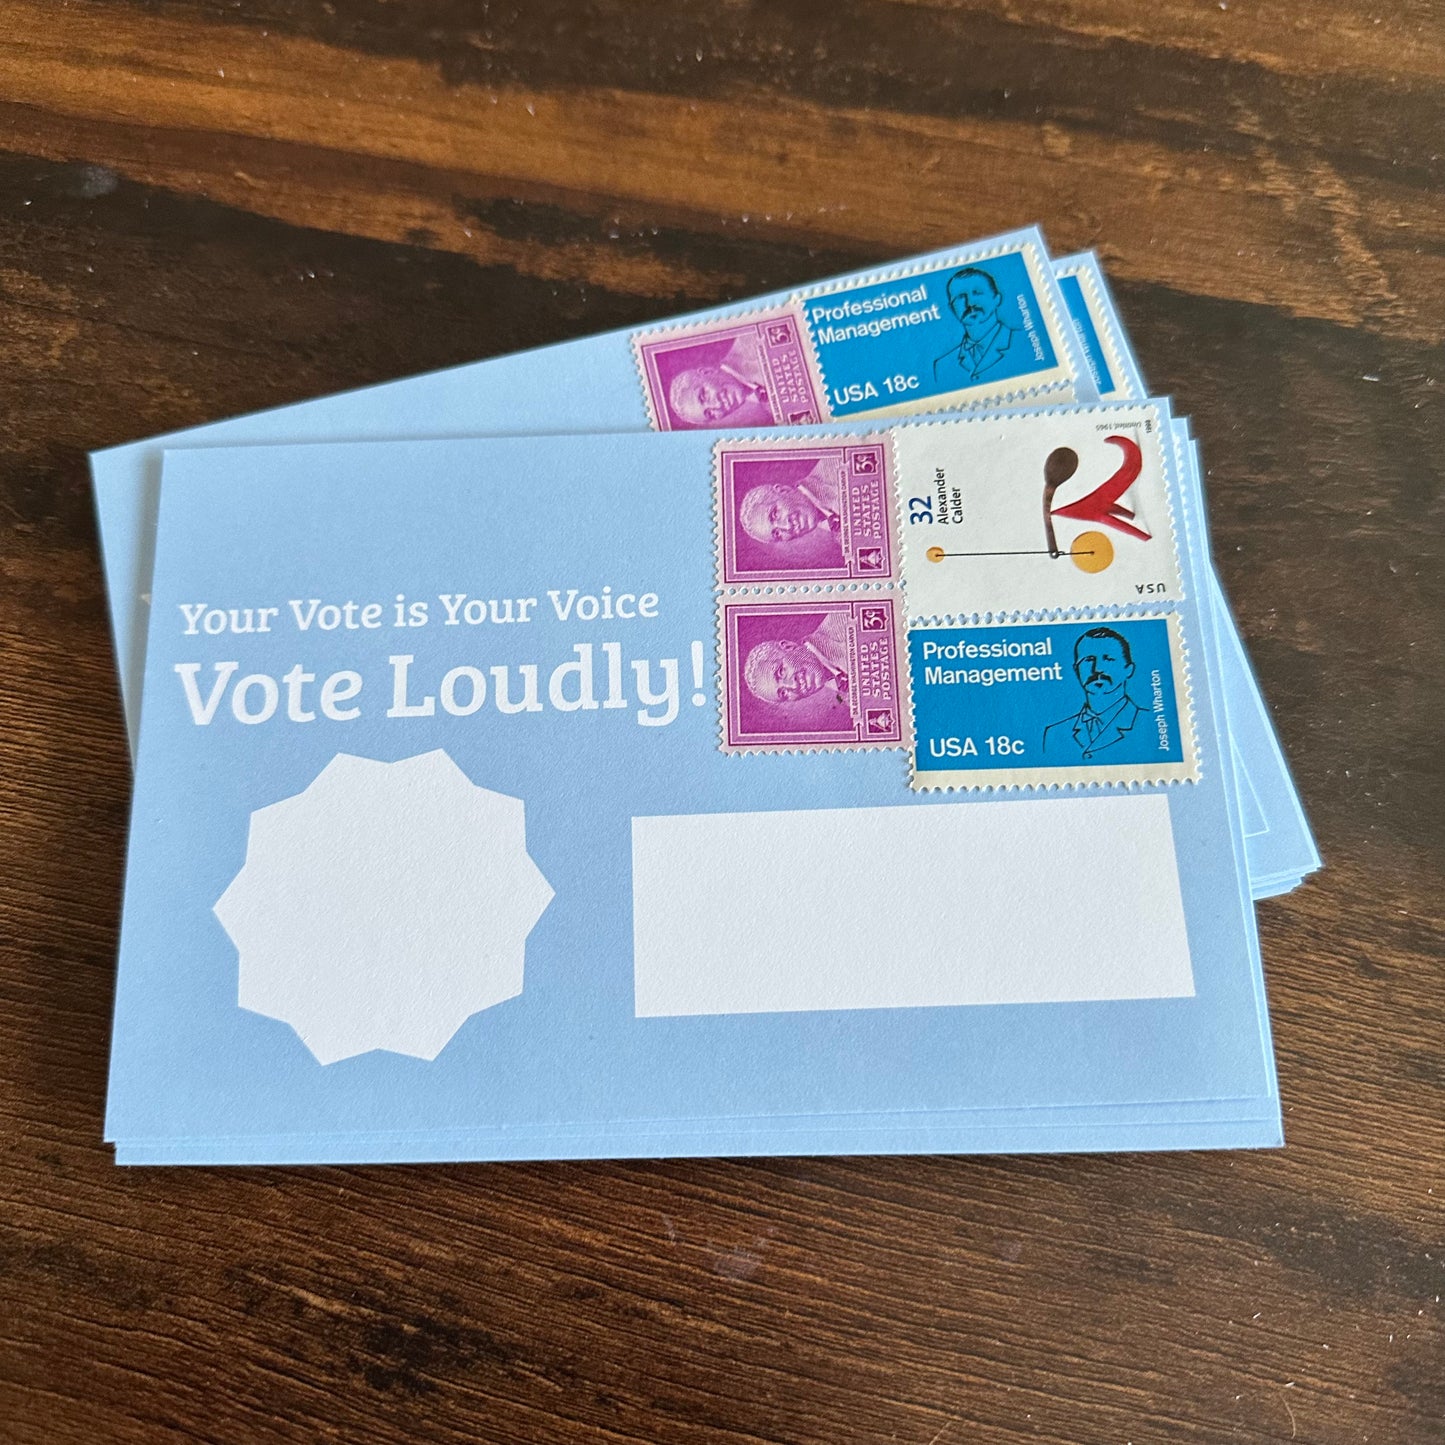 Stamps Affixed: 100 Vote Loudly postcards to voters